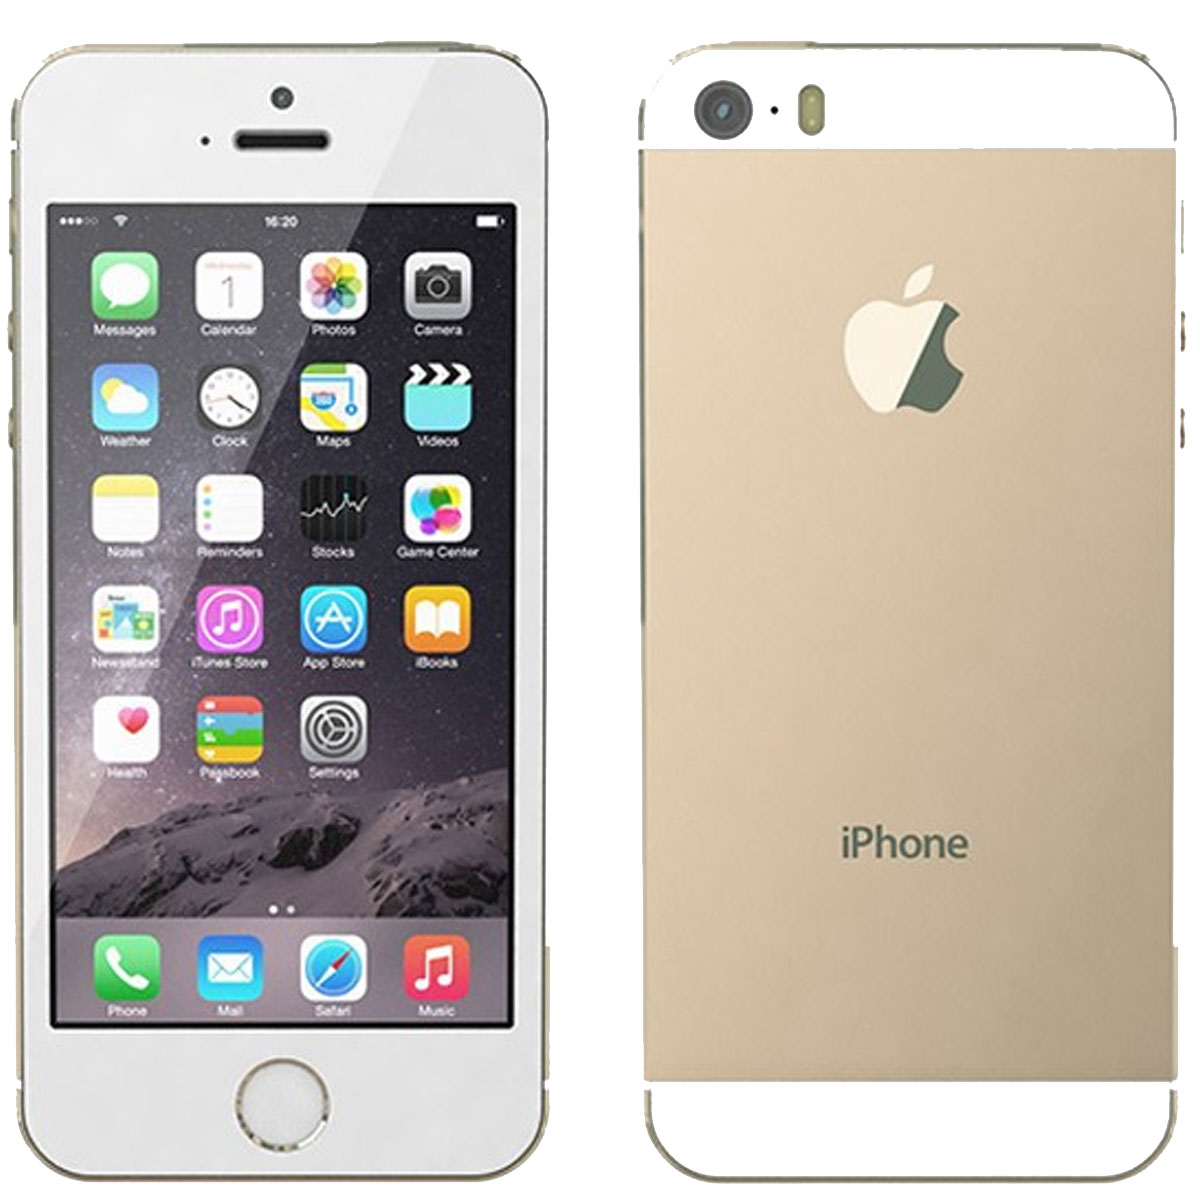 apple iphone 5s images